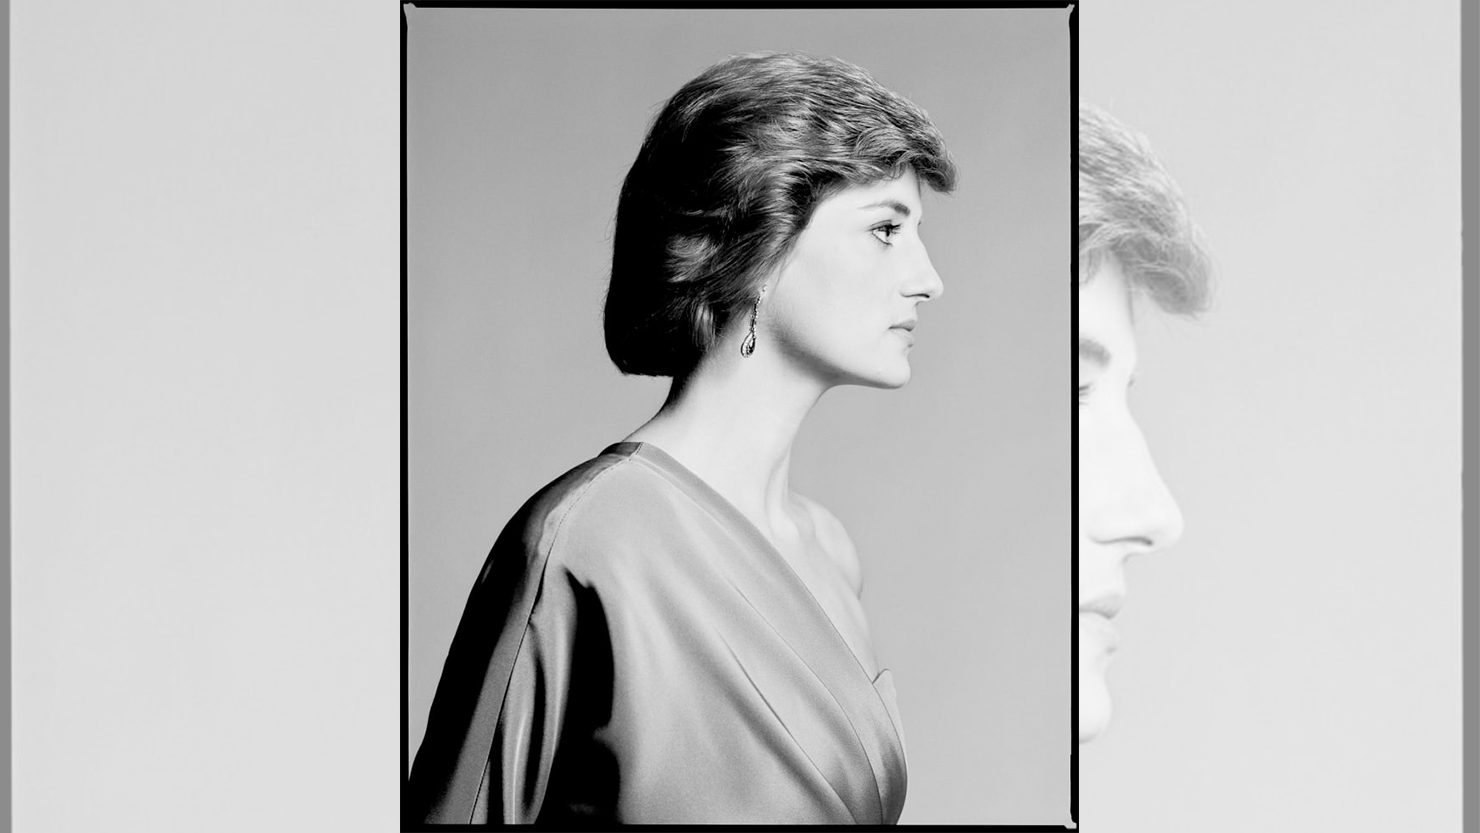 This unique photograph shows Princess Diana in a new light